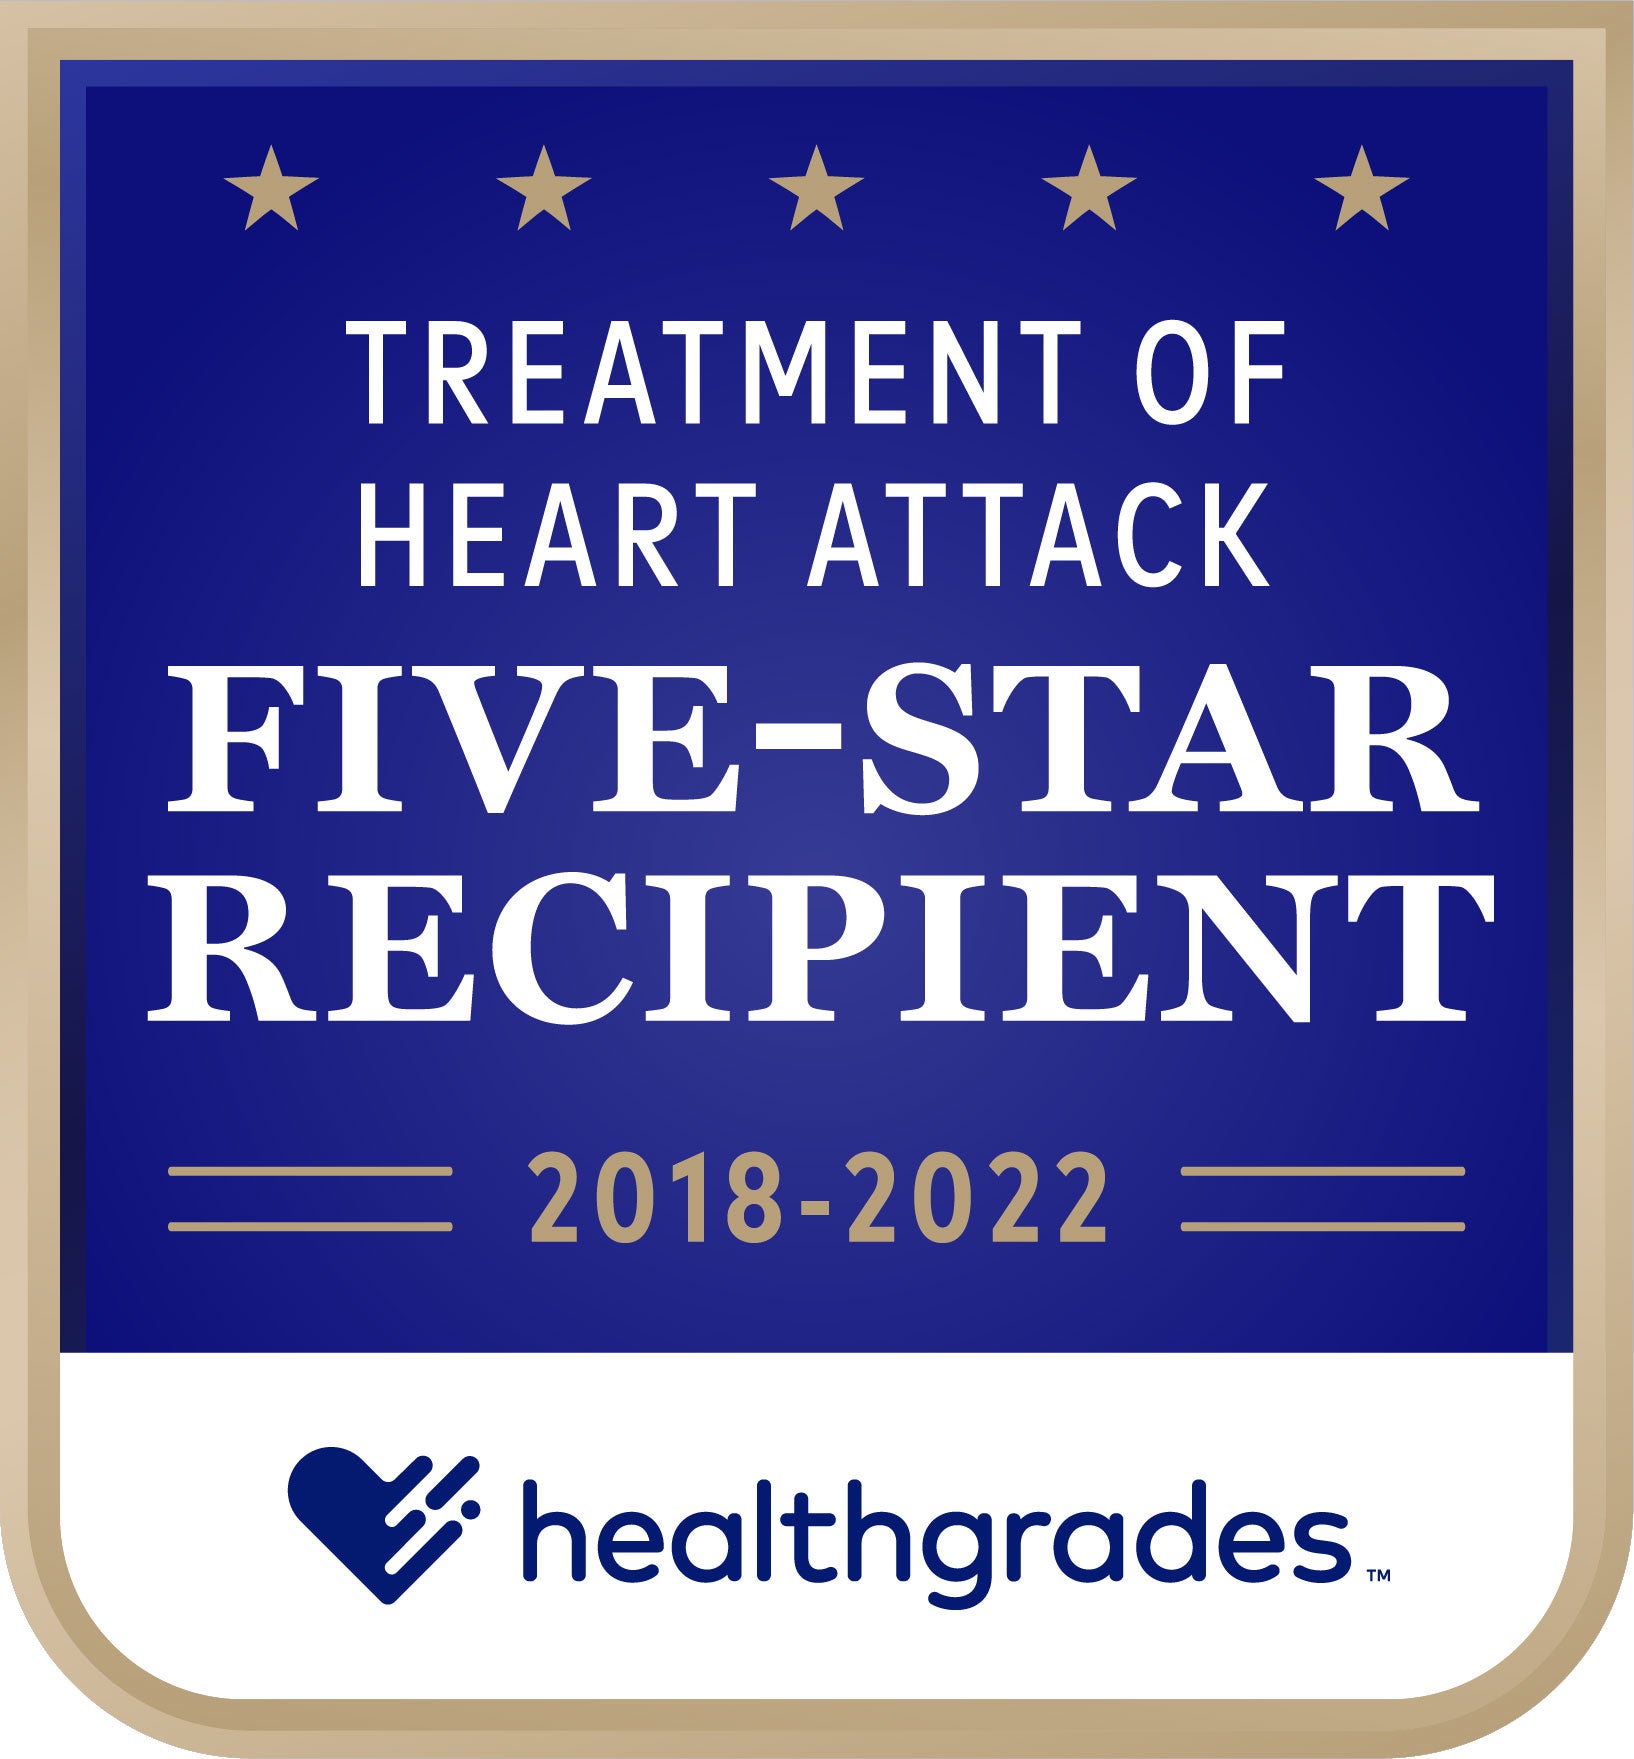 Five-Star Recipient for Treatment of Heart Attack for 5 Years in a Row (2018-2022) Award